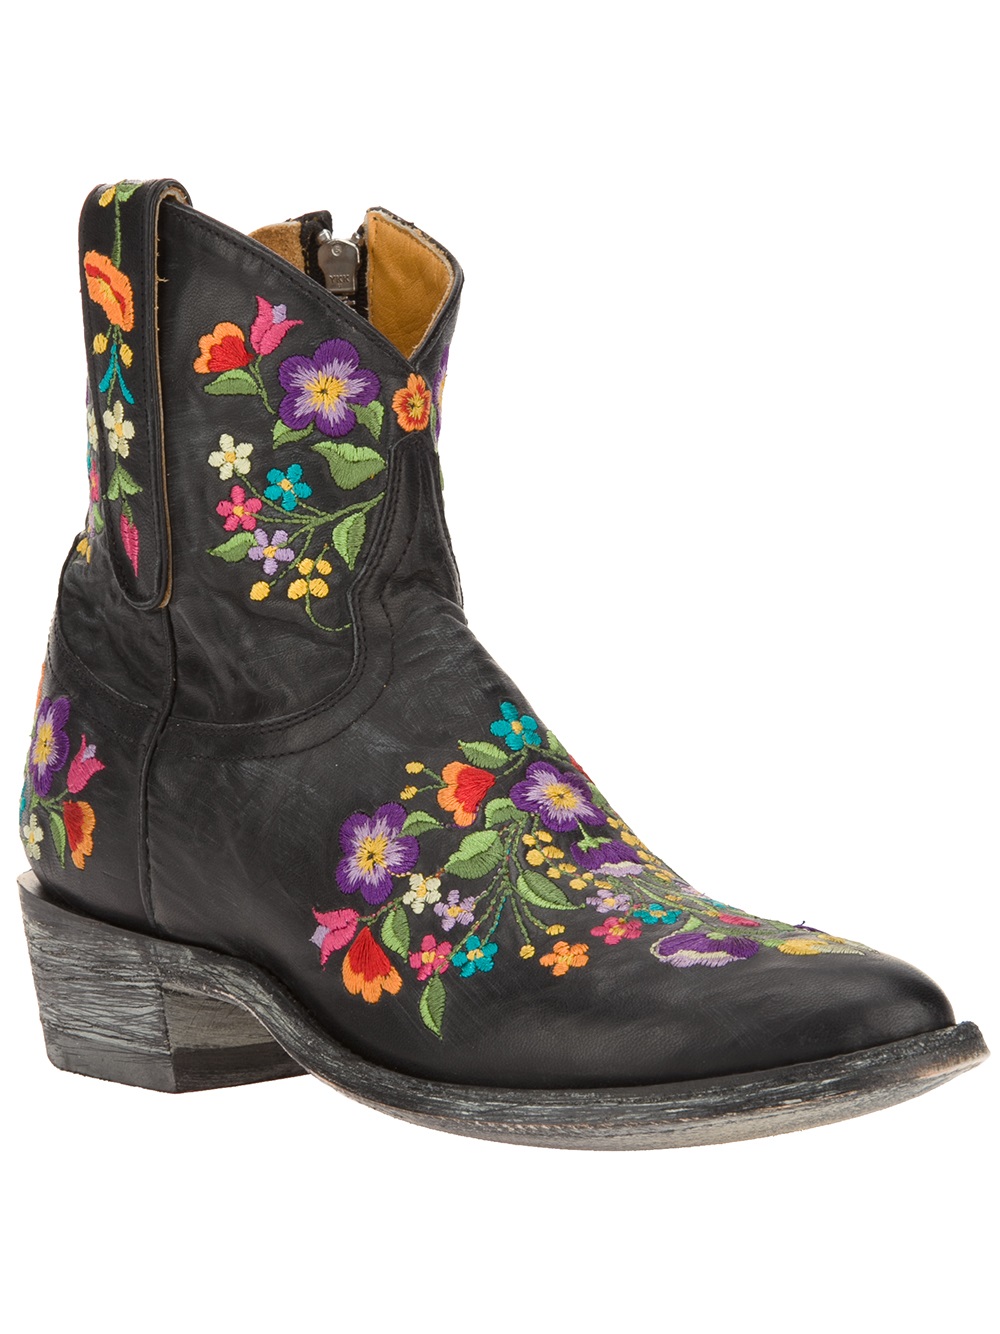 Mexicana Embroidered Floral Ankle Boot in Black | Lyst